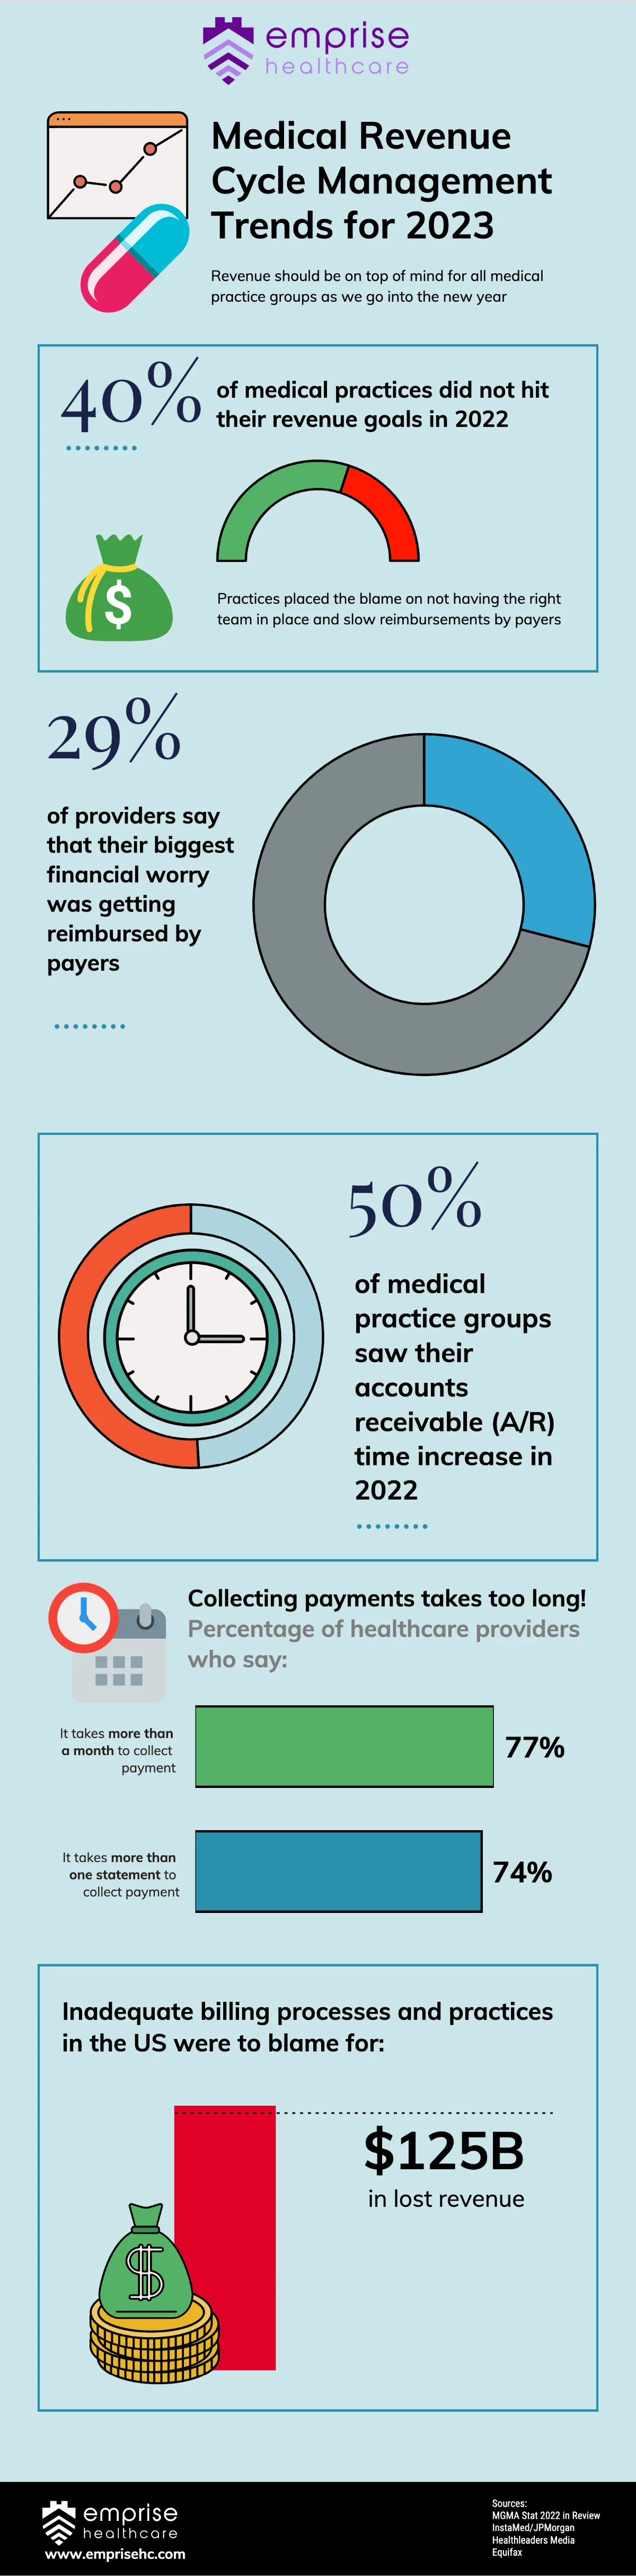 2023 Trends in Medical Revenue Cycle Management infographic